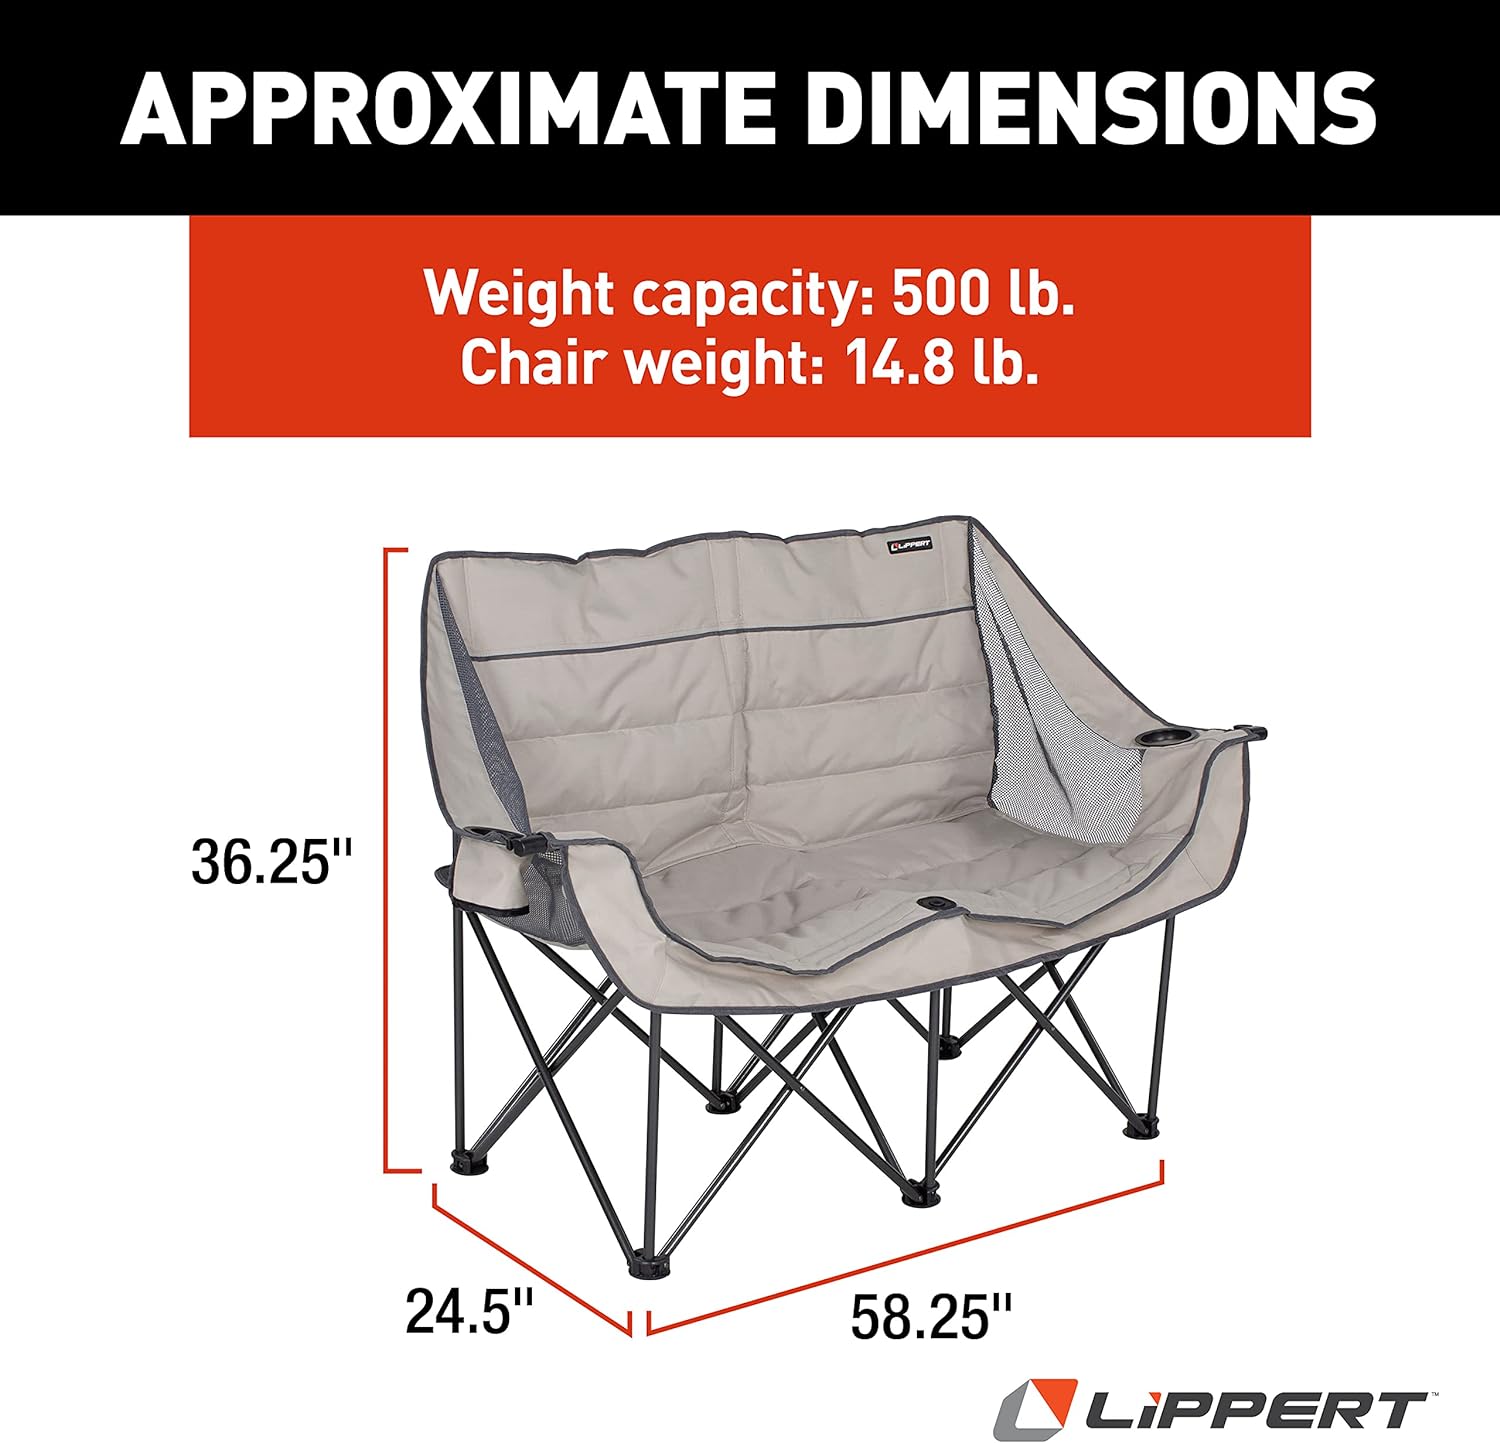 Lippert Campfire Folding Loveseat with 500-lb. Weight Capacity, Carry Bag, Durable Mesh Fabrics, High-Loft Cushioning, Storage Pocket, Dual Cupholders, Stemmed Wine Glass Holder (Sand) - 2021000205